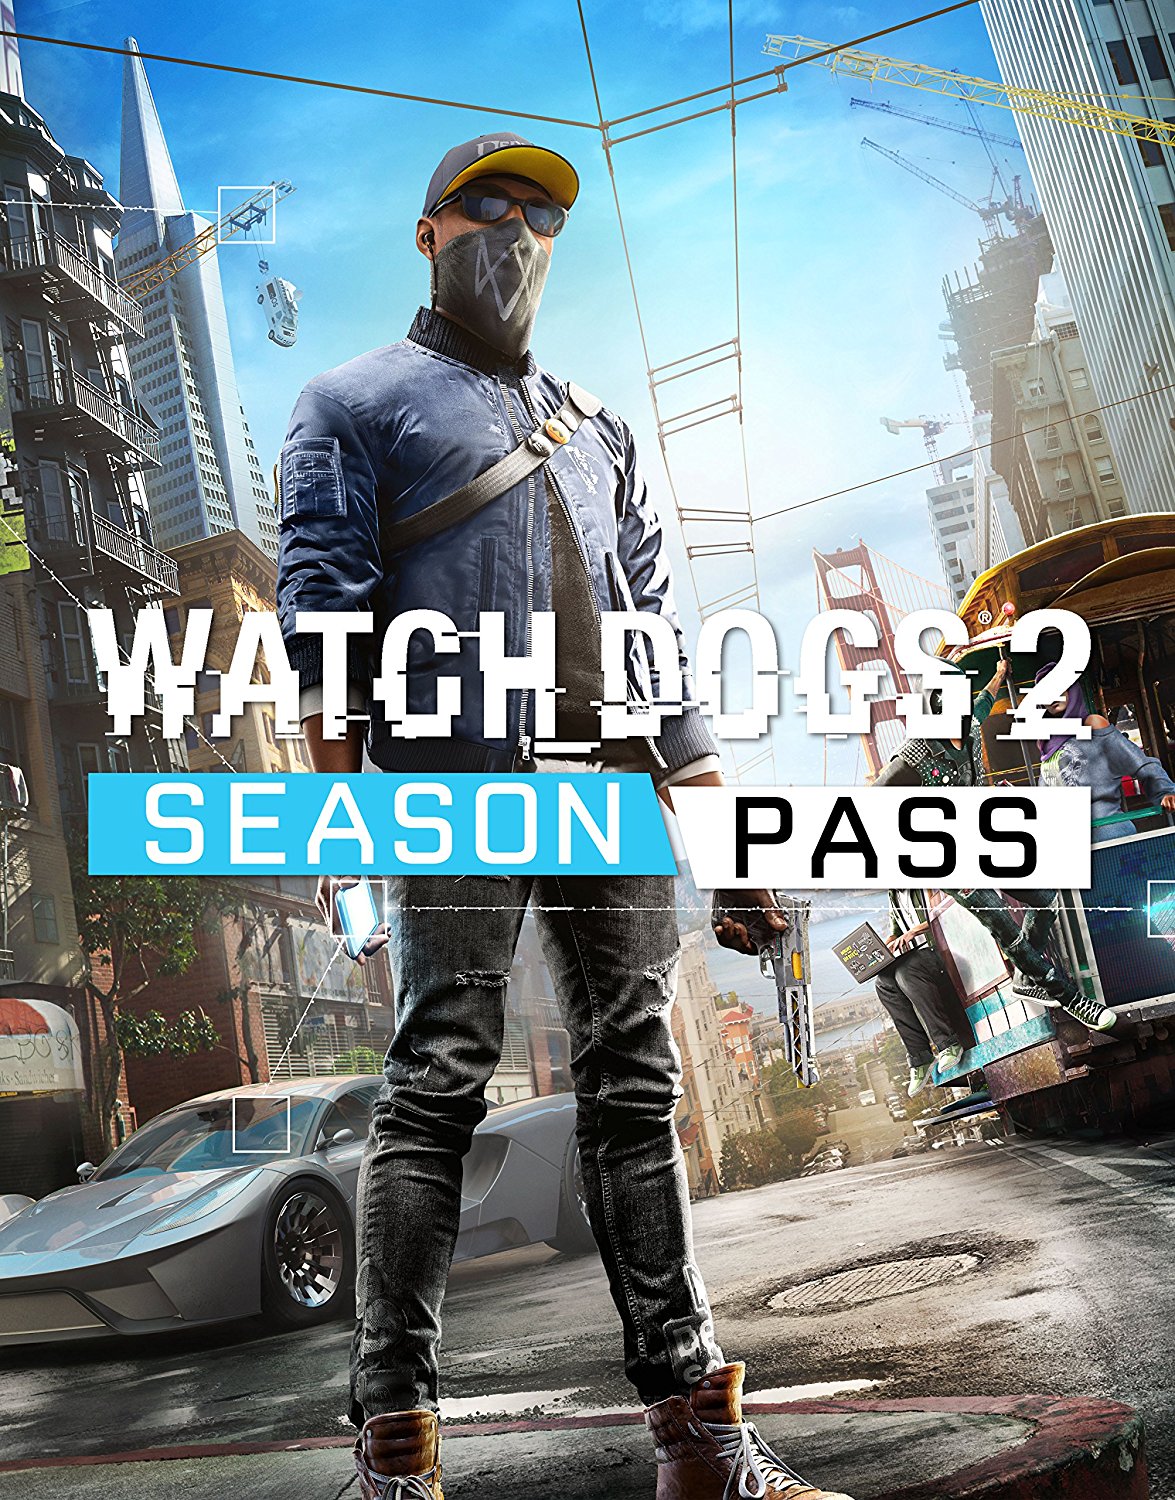 uplay download watch dogs 2